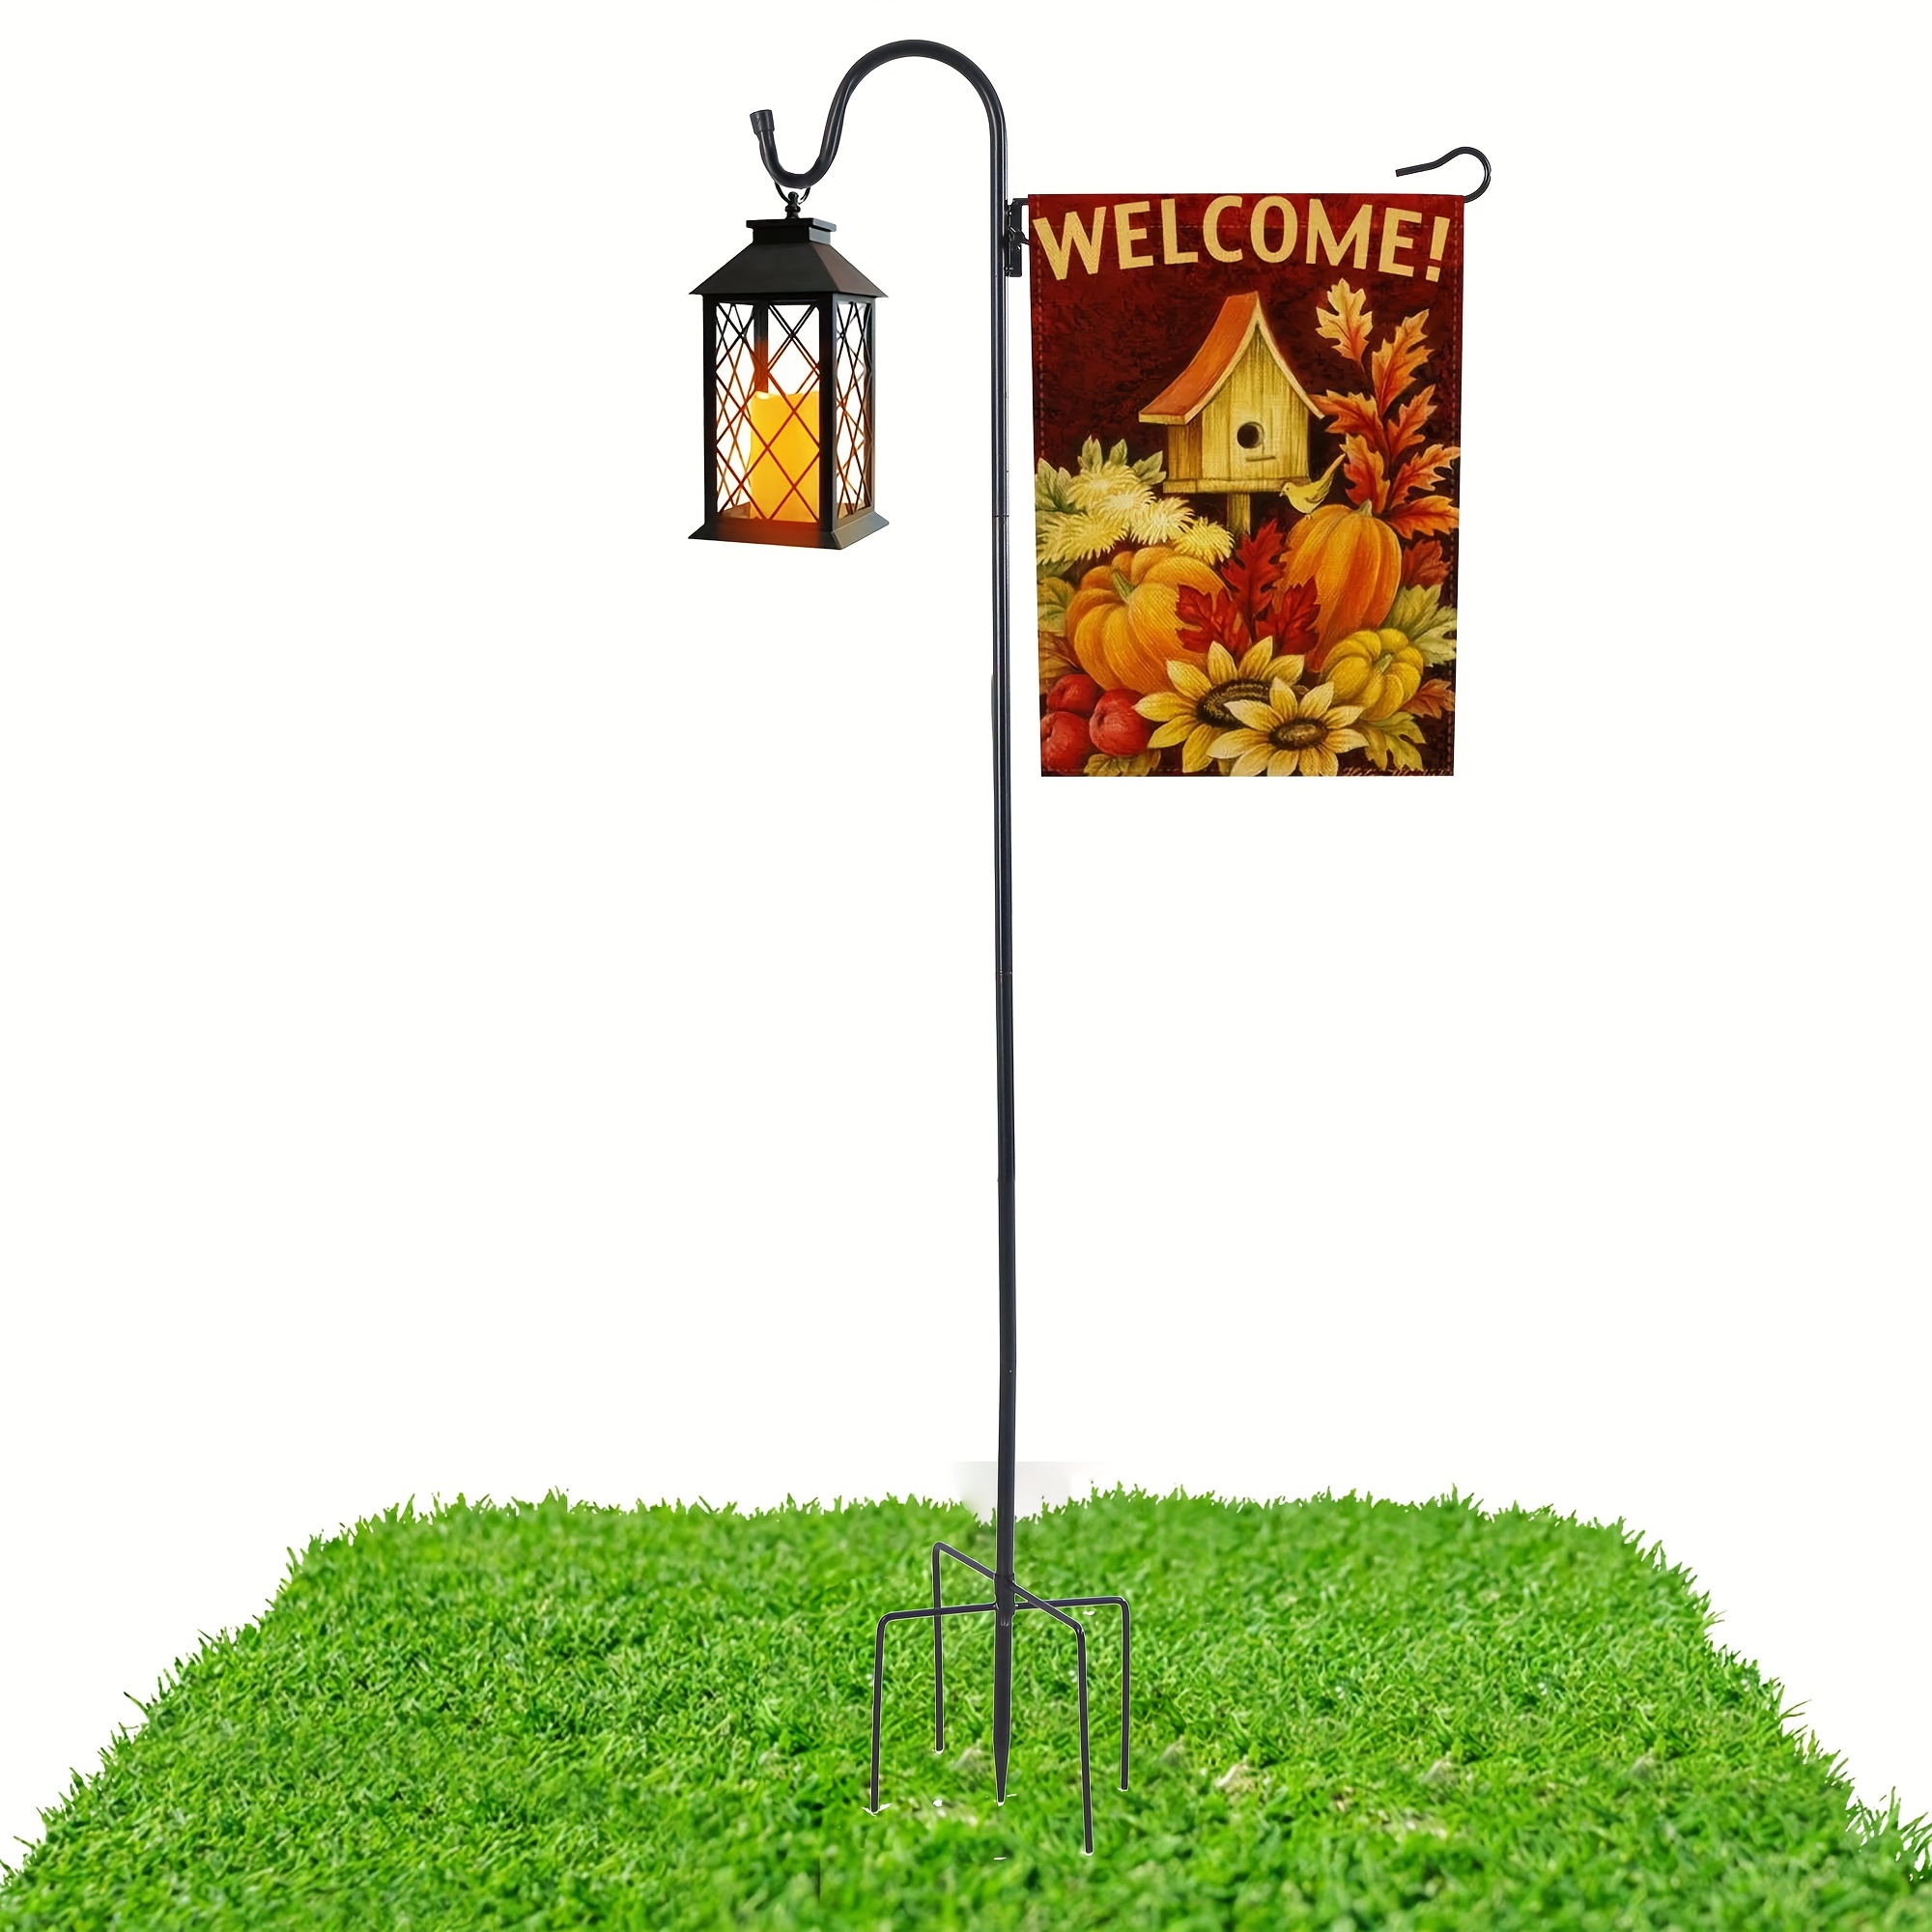 

Heavy-duty 48.8" Garden Flag Pole With Anti-wind Clip - Includes Welcome Flag, Perfect For Outdoor Decor & Light Stands